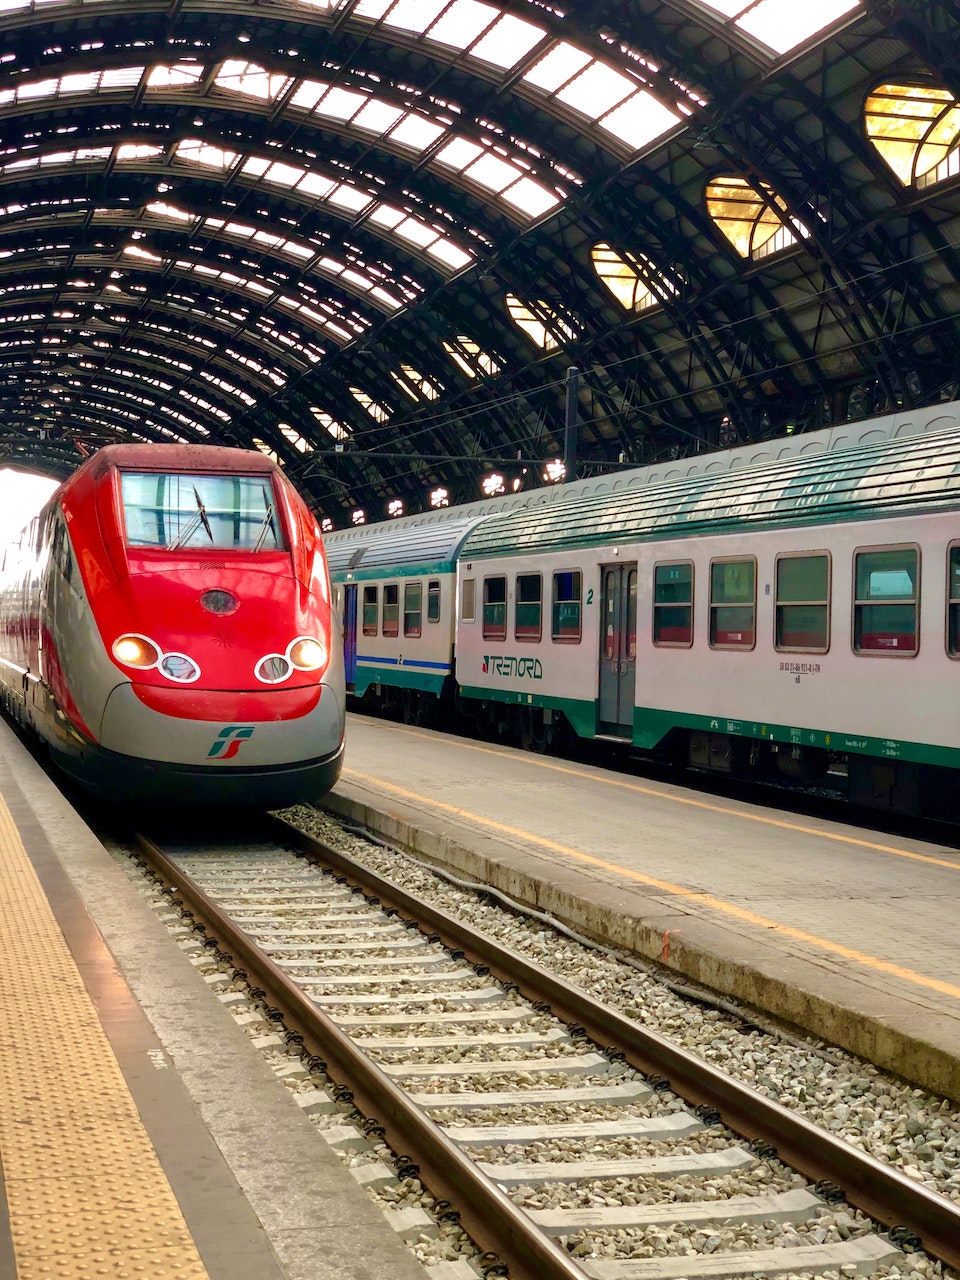 Save money in Italy by traveling in trains